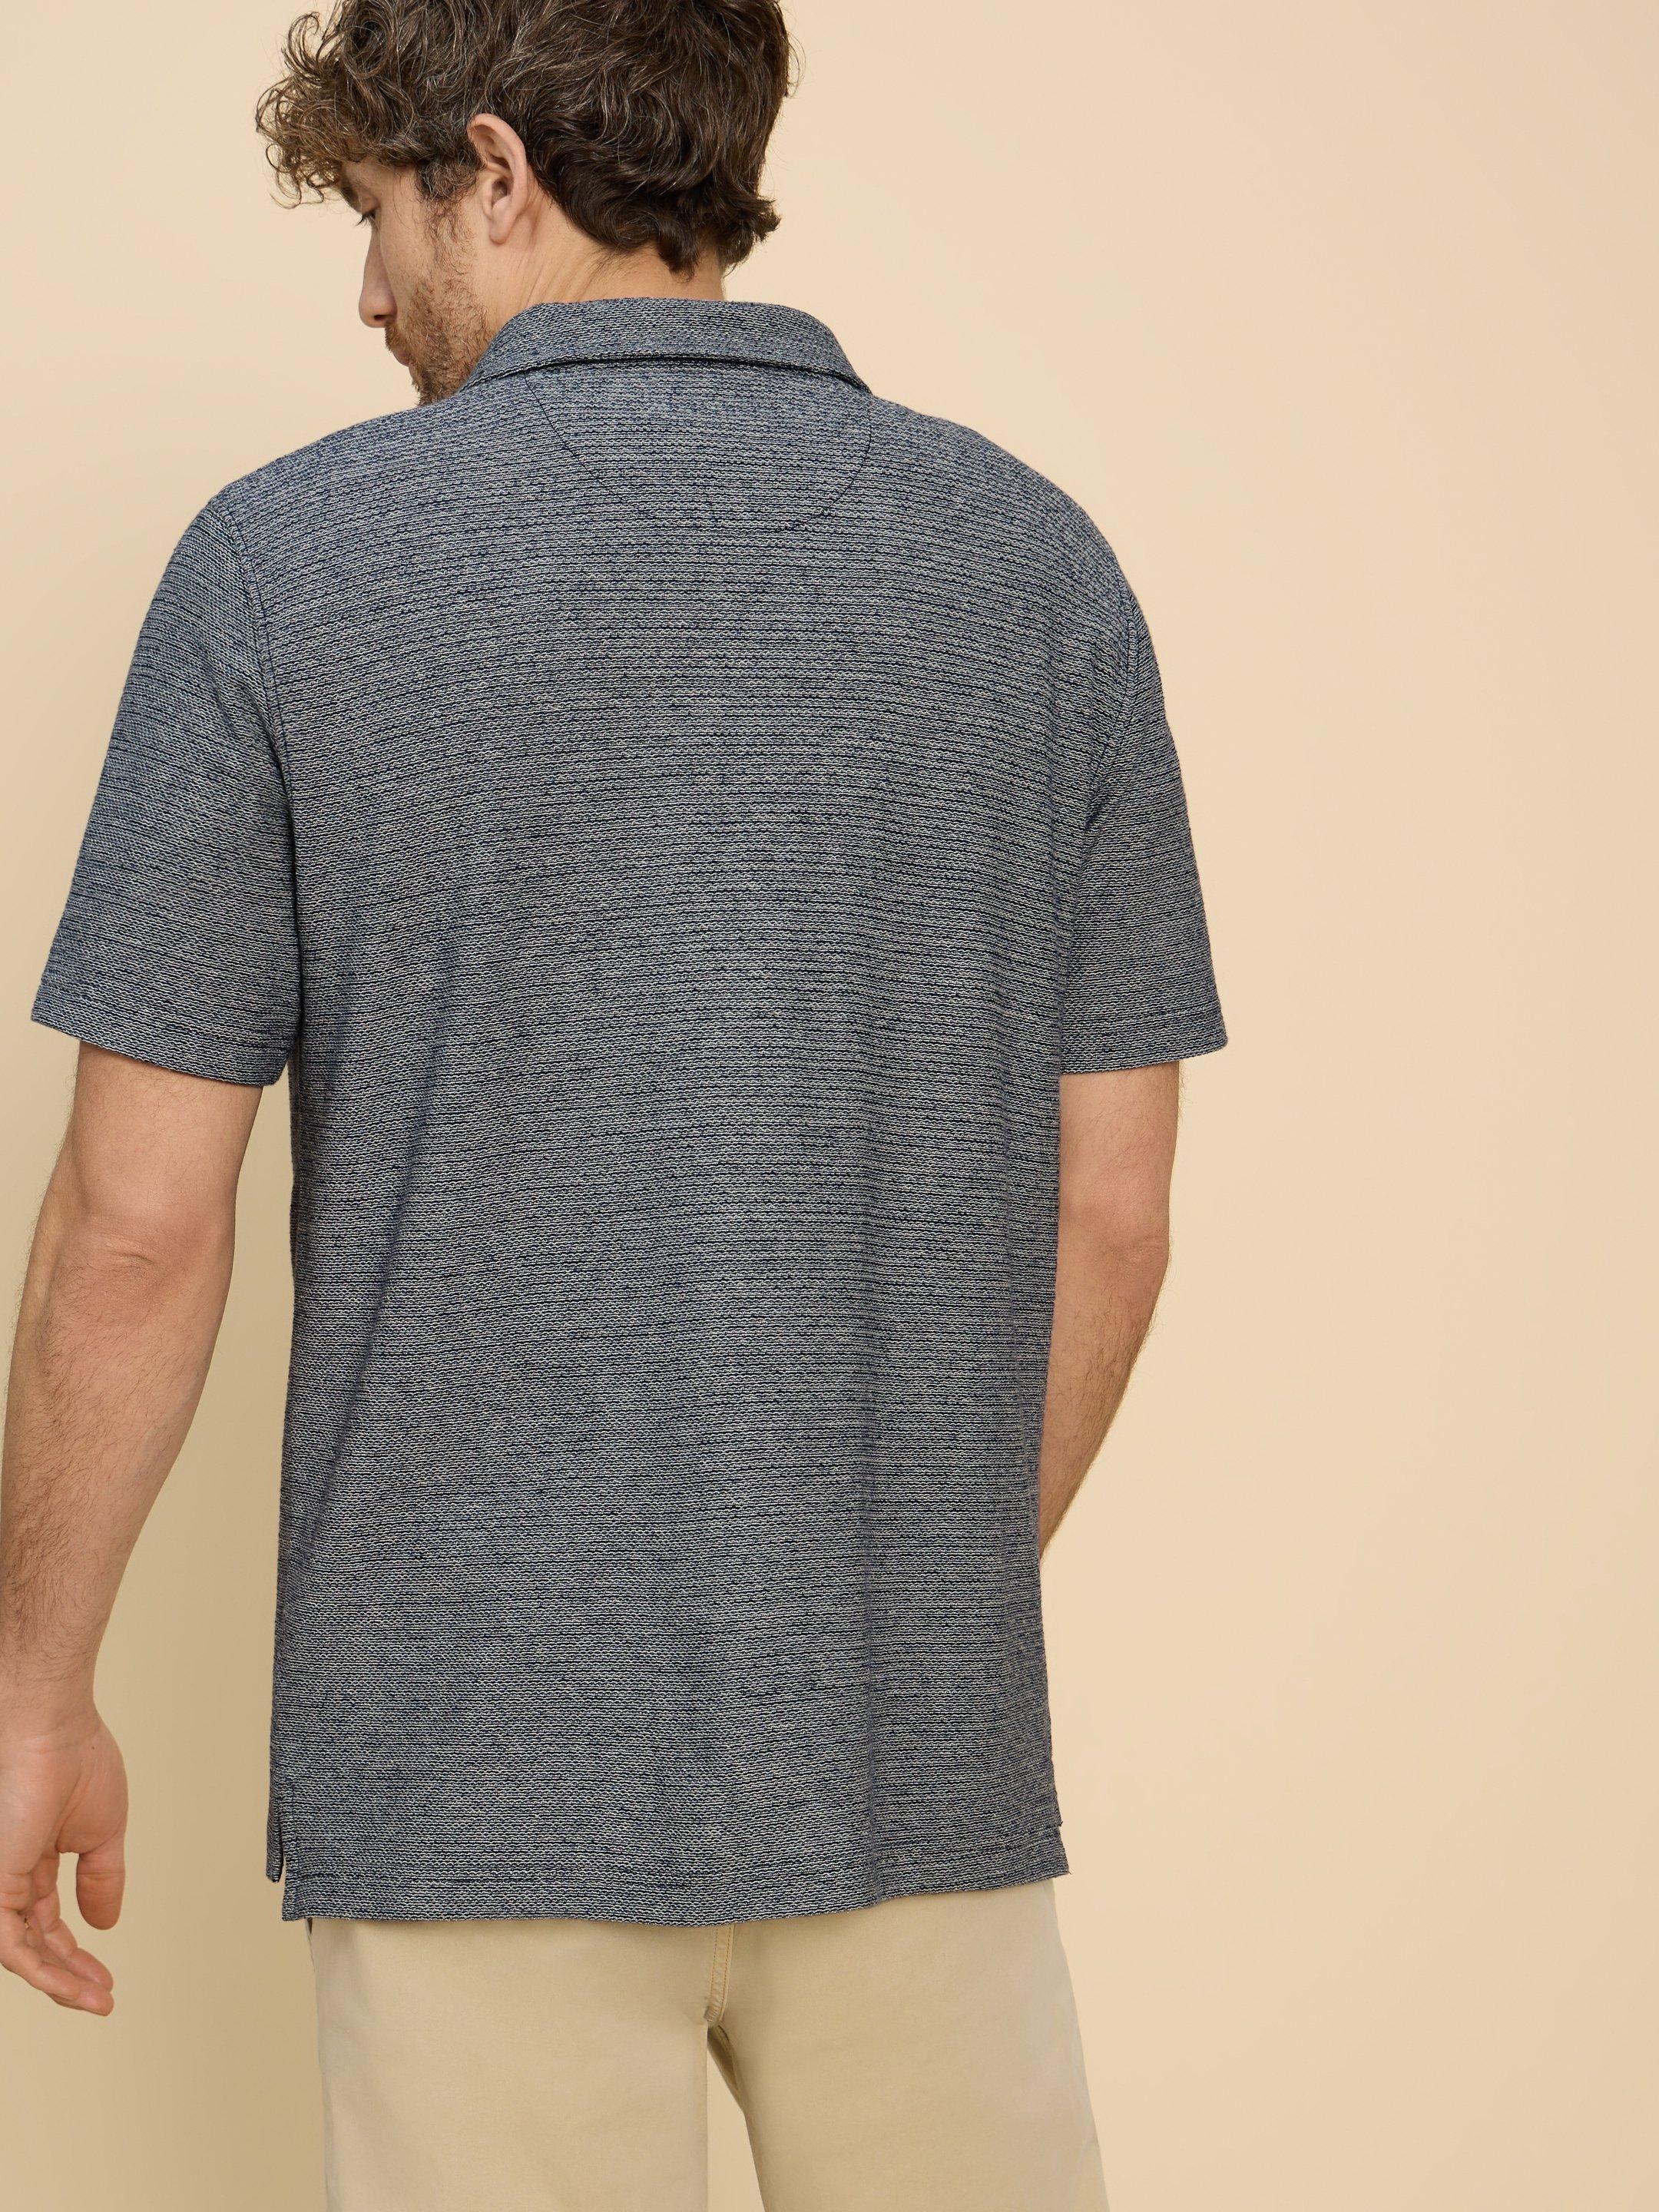 Twisted Texture Polo in NAVY MULTI - MODEL BACK